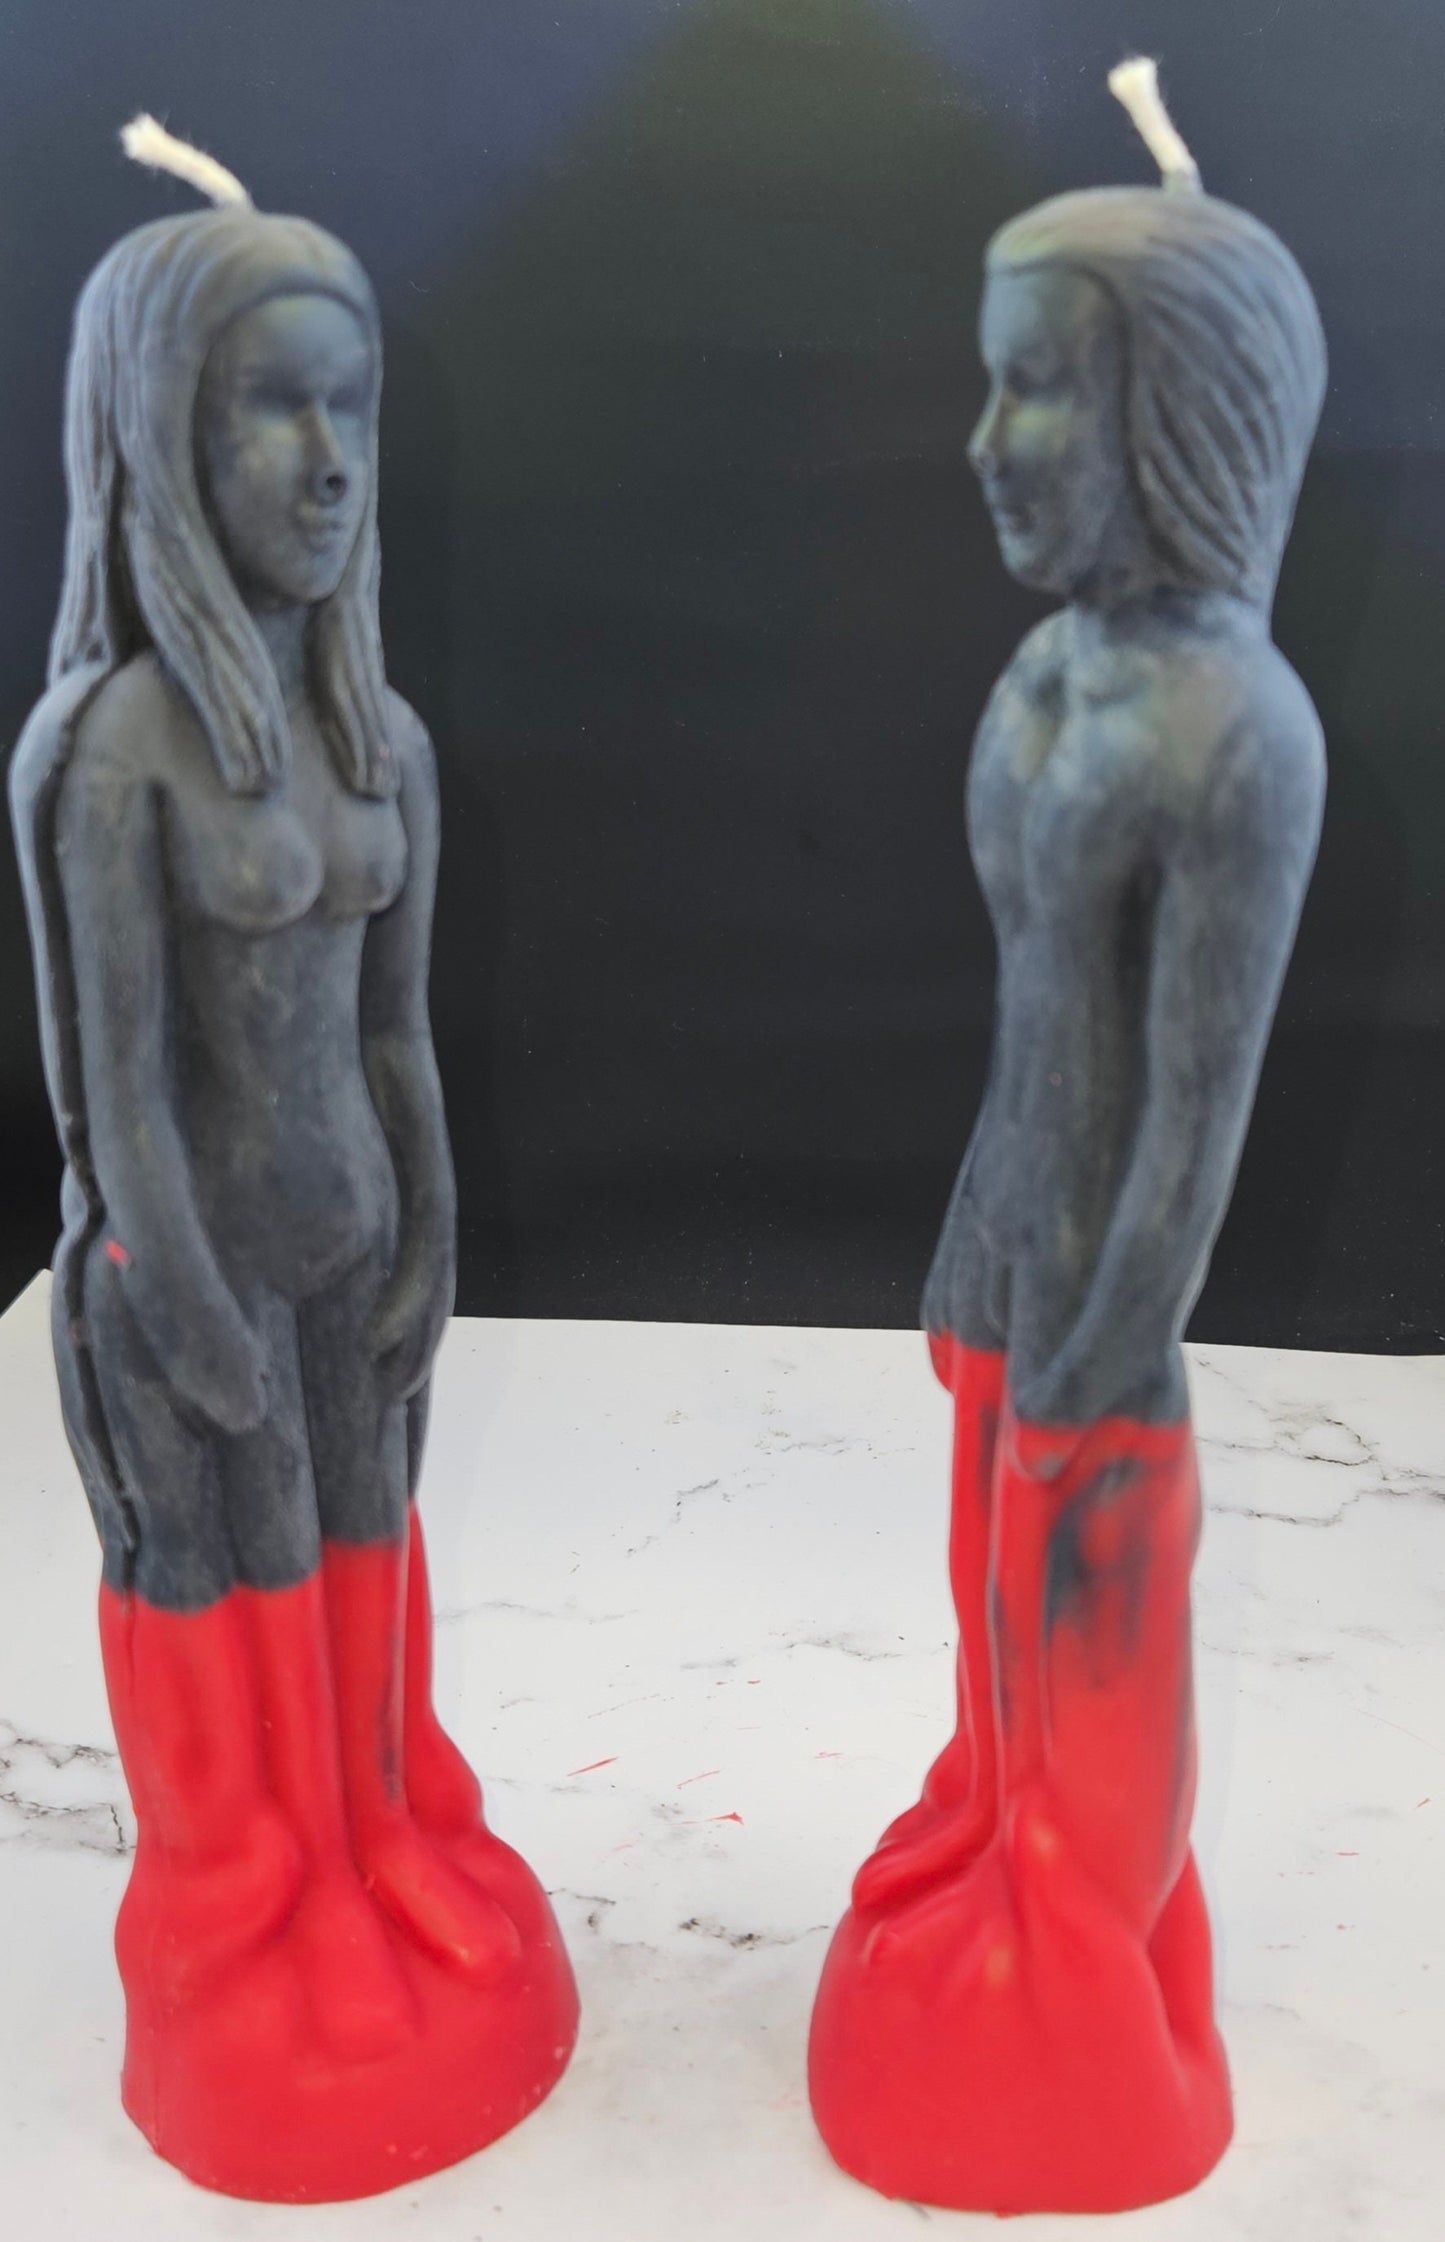 Free USA Shipping black and red reversible Female or Male figure soy candle